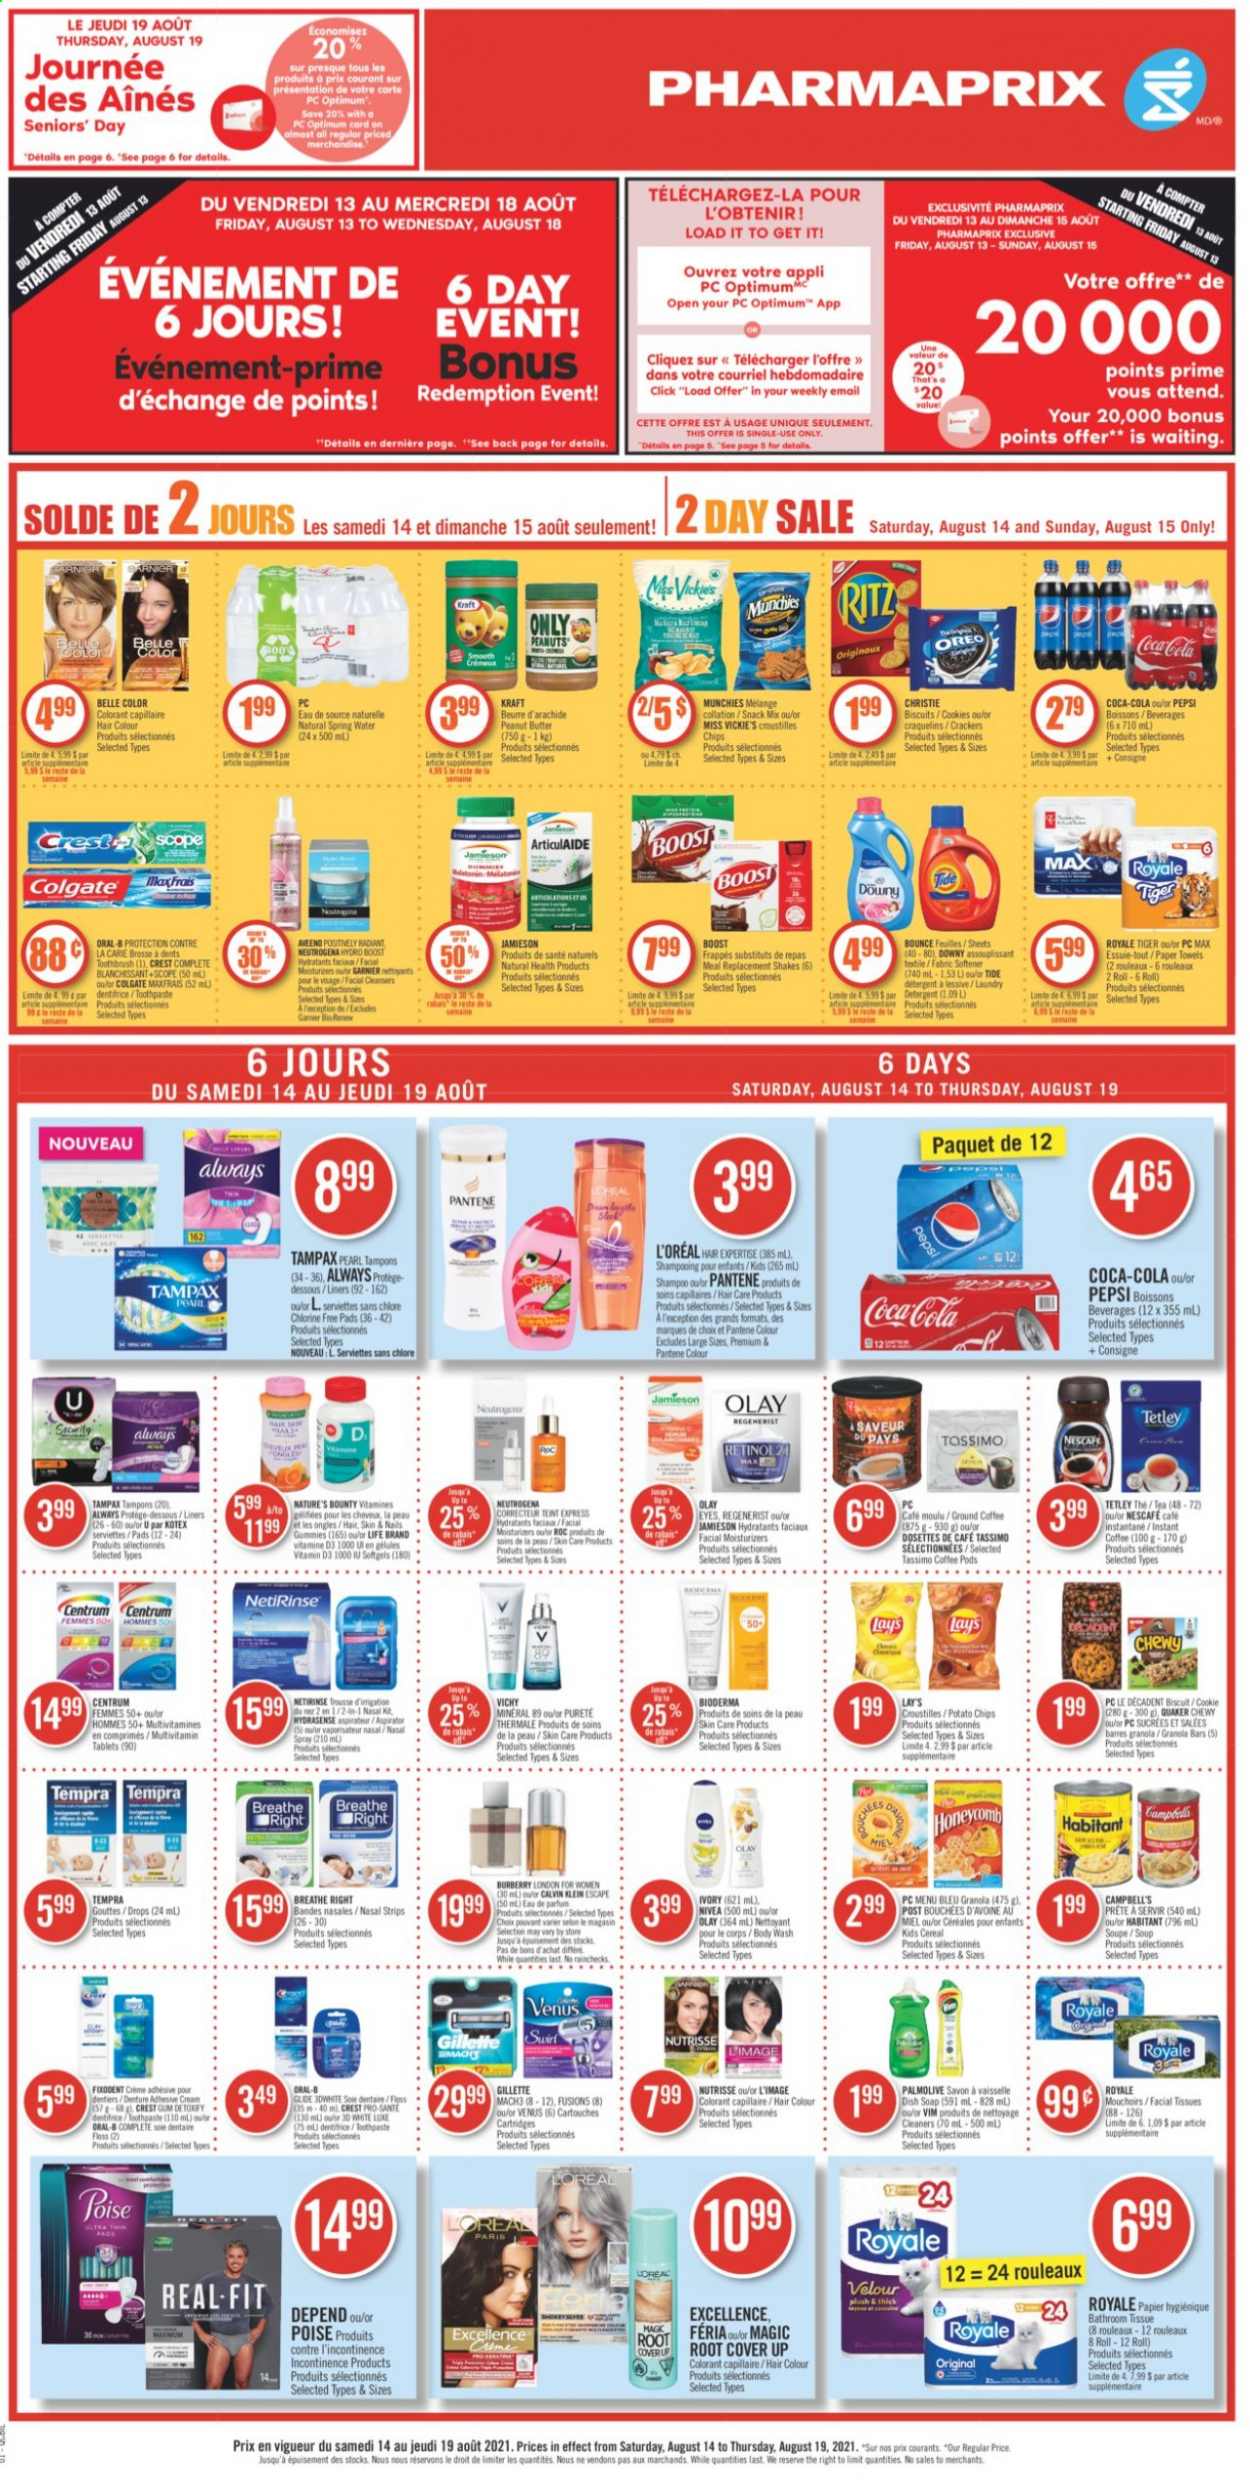 thumbnail - Pharmaprix Flyer - August 14, 2021 - August 19, 2021 - Sales products - Campbell's, soup, Quaker, Kraft®, shake, cookies, snack, crackers, biscuit, RITZ, potato chips, Lay’s, cereals, granola bar, peanut butter, Coca-Cola, Pepsi, spring water, Boost, coffee pods, instant coffee, ground coffee, Aveeno, bath tissue, kitchen towels, paper towels, Tide, fabric softener, Bounce, body wash, Vichy, Palmolive, soap, toothbrush, Fixodent, Crest, Kotex, tampons, facial tissues, L’Oréal, moisturizer, Olay, hair color, Venus, multivitamin, Nature's Bounty, vitamin D3, Centrum, nasal spray, Oreo, Garnier, Gillette, Neutrogena, shampoo, Tampax, Pantene, Nivea, Oral-B, chips, Nescafé. Page 1.